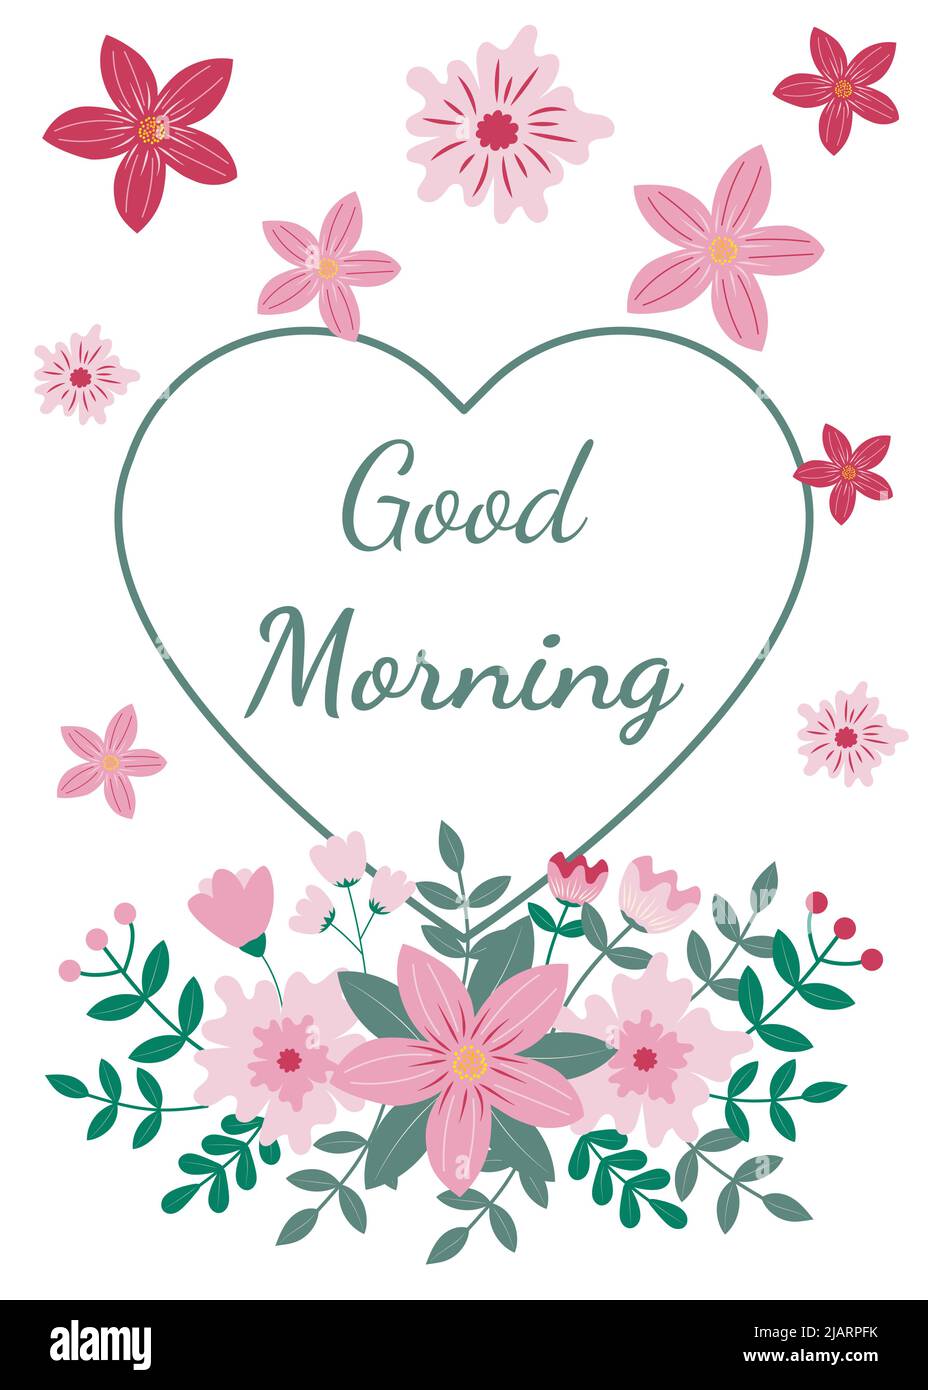 Good morning greeting card with floral ornament on white background ...